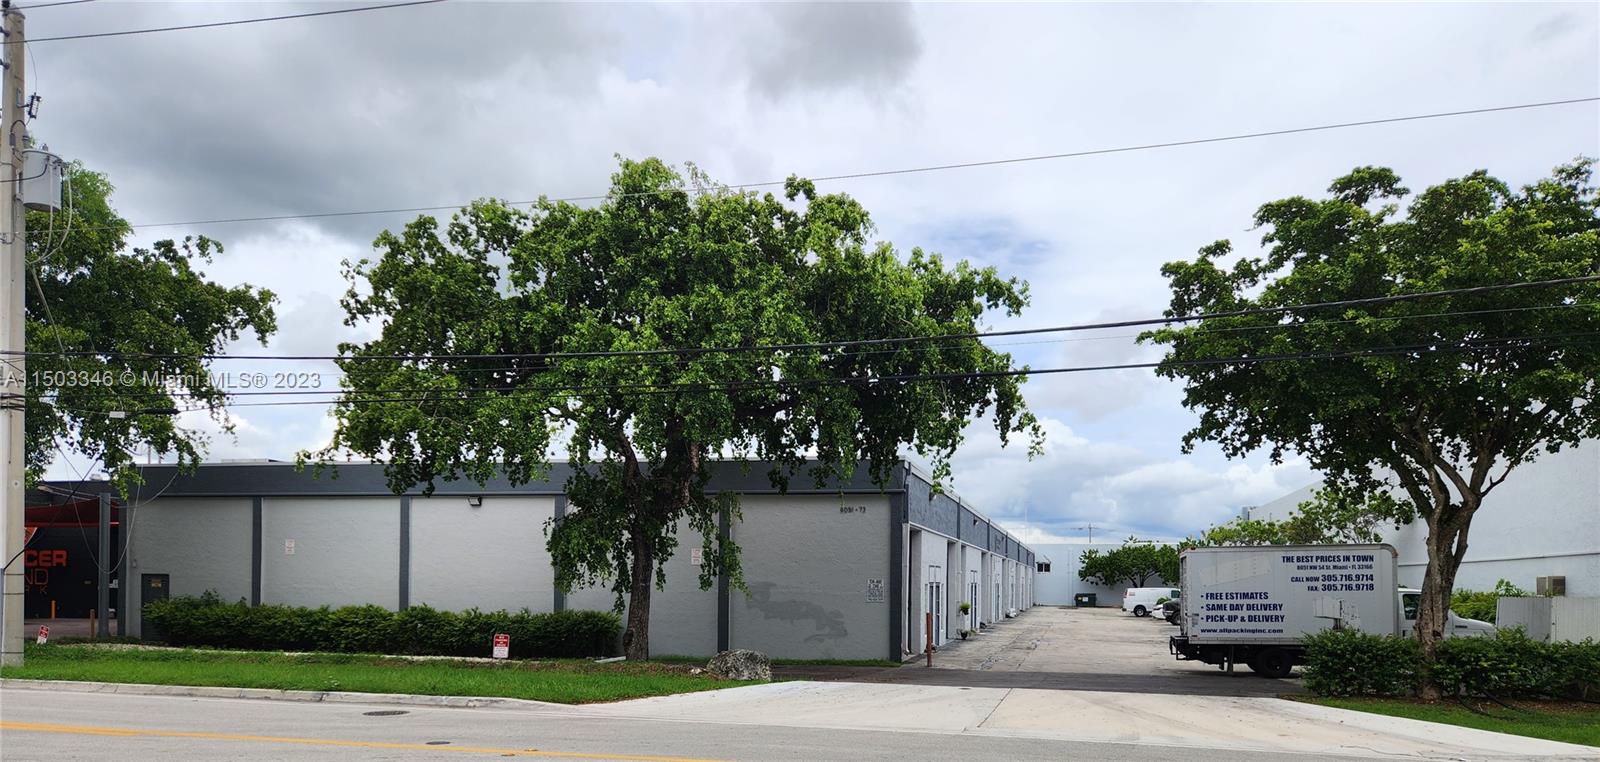 8051 NW 54th St 8067-8069, Doral, Florida 33166, ,Commerciallease,For Rent,8051 NW 54th St 8067-8069,A11503346